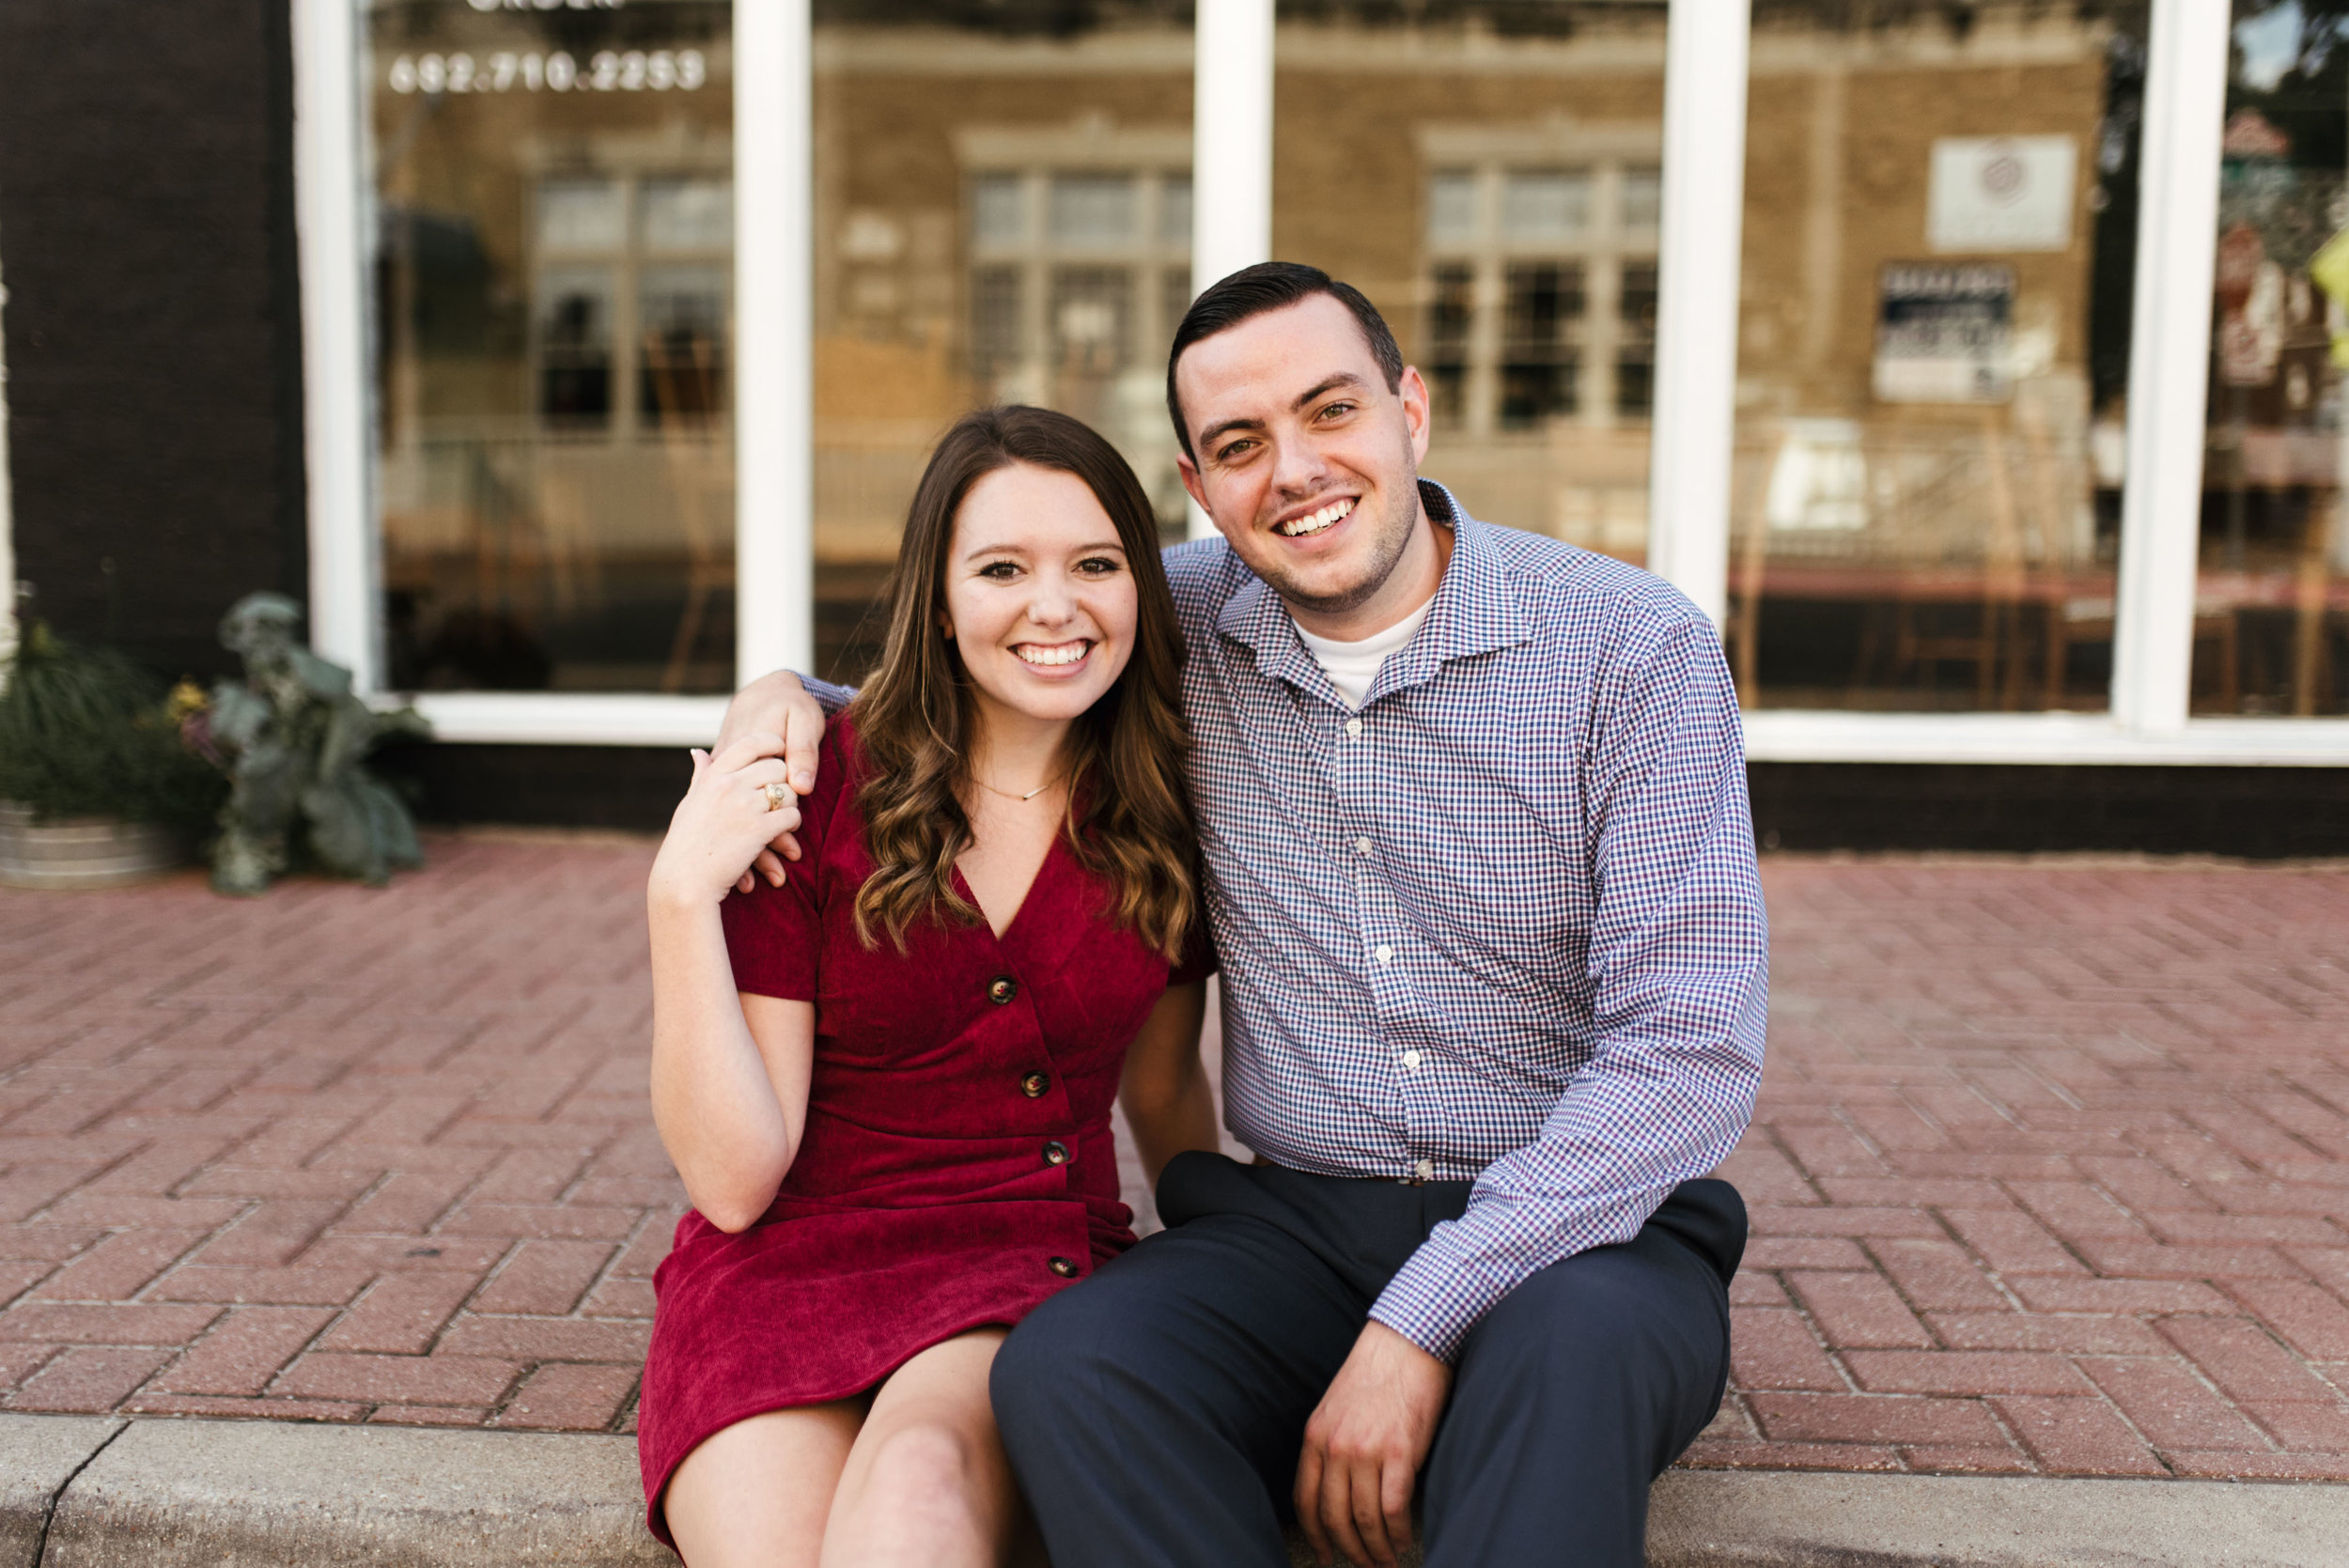  Fort Worth engagement session | Fort Worth engagement photographer | Fort Worth Wedding photographer | www.jordanmitchellphotography.com 